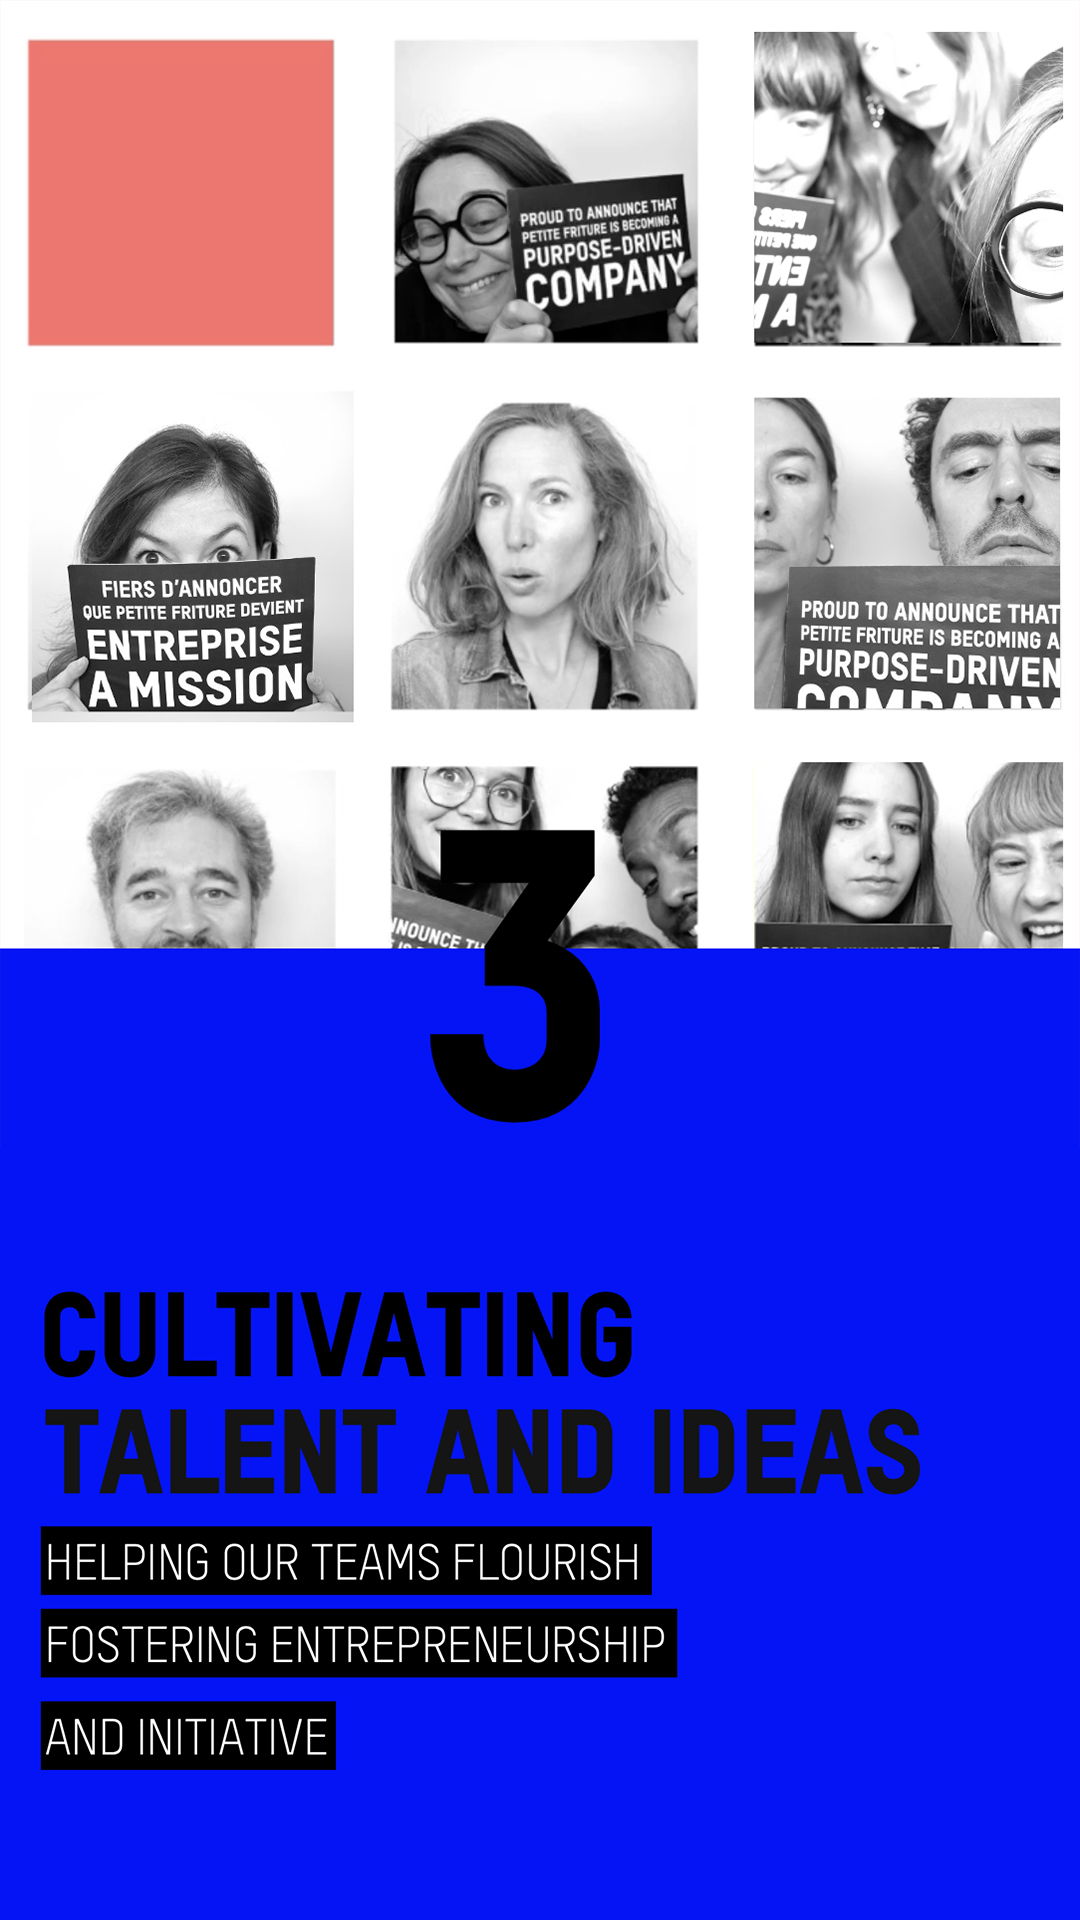 Cultivating talent and ideas